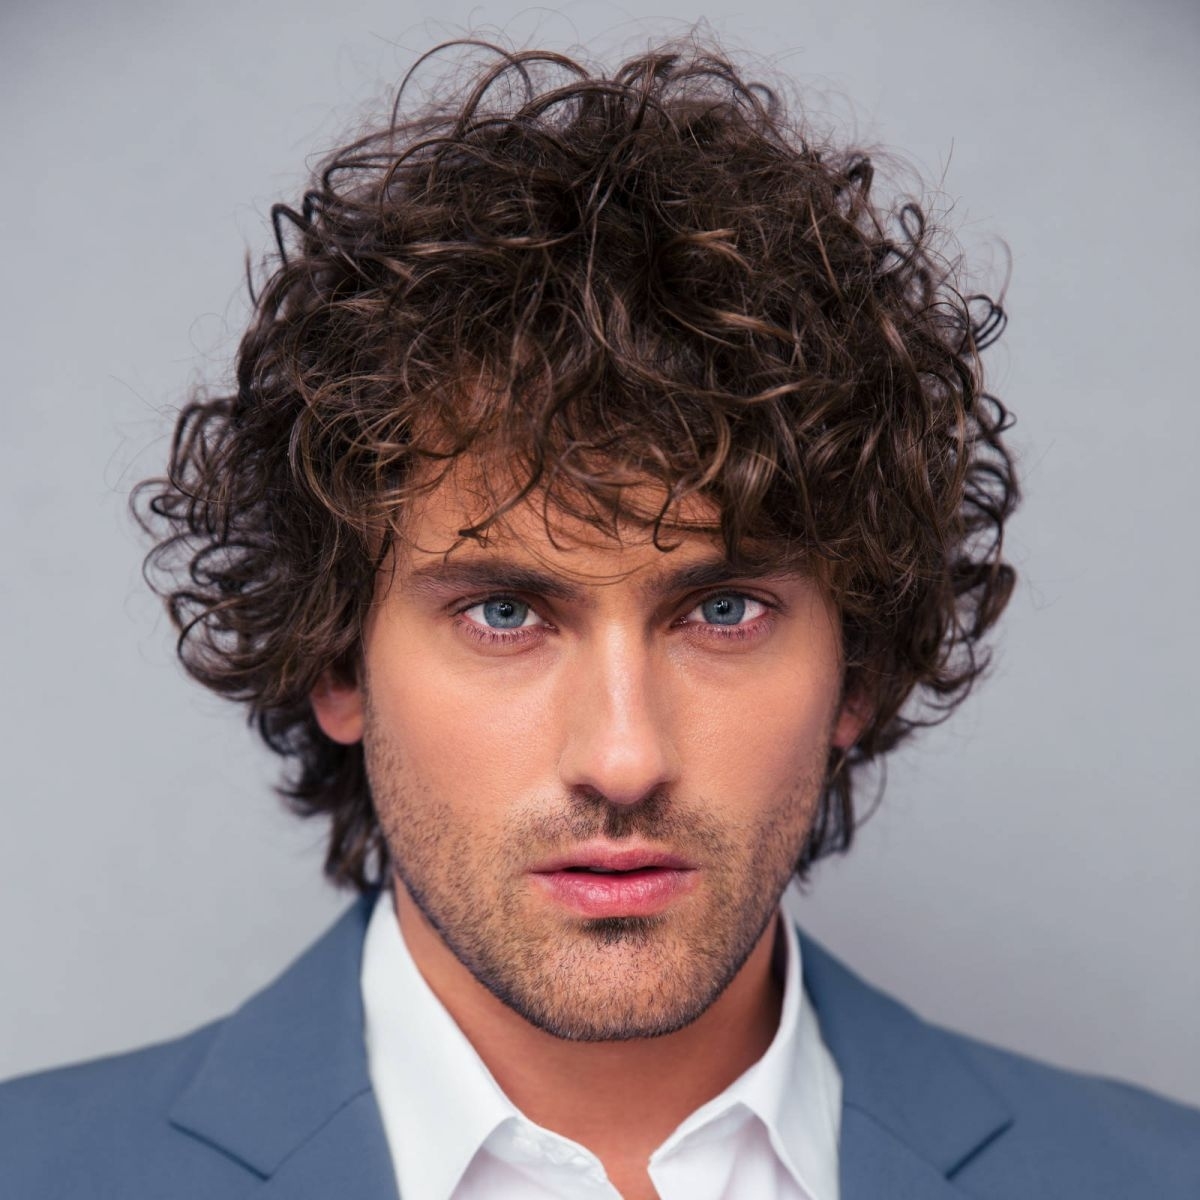 40 Modern Men&amp;#039;s Hairstyles For Curly Hair (That Will Change Your Look) inside Haircuts For Curly Unruly Hair